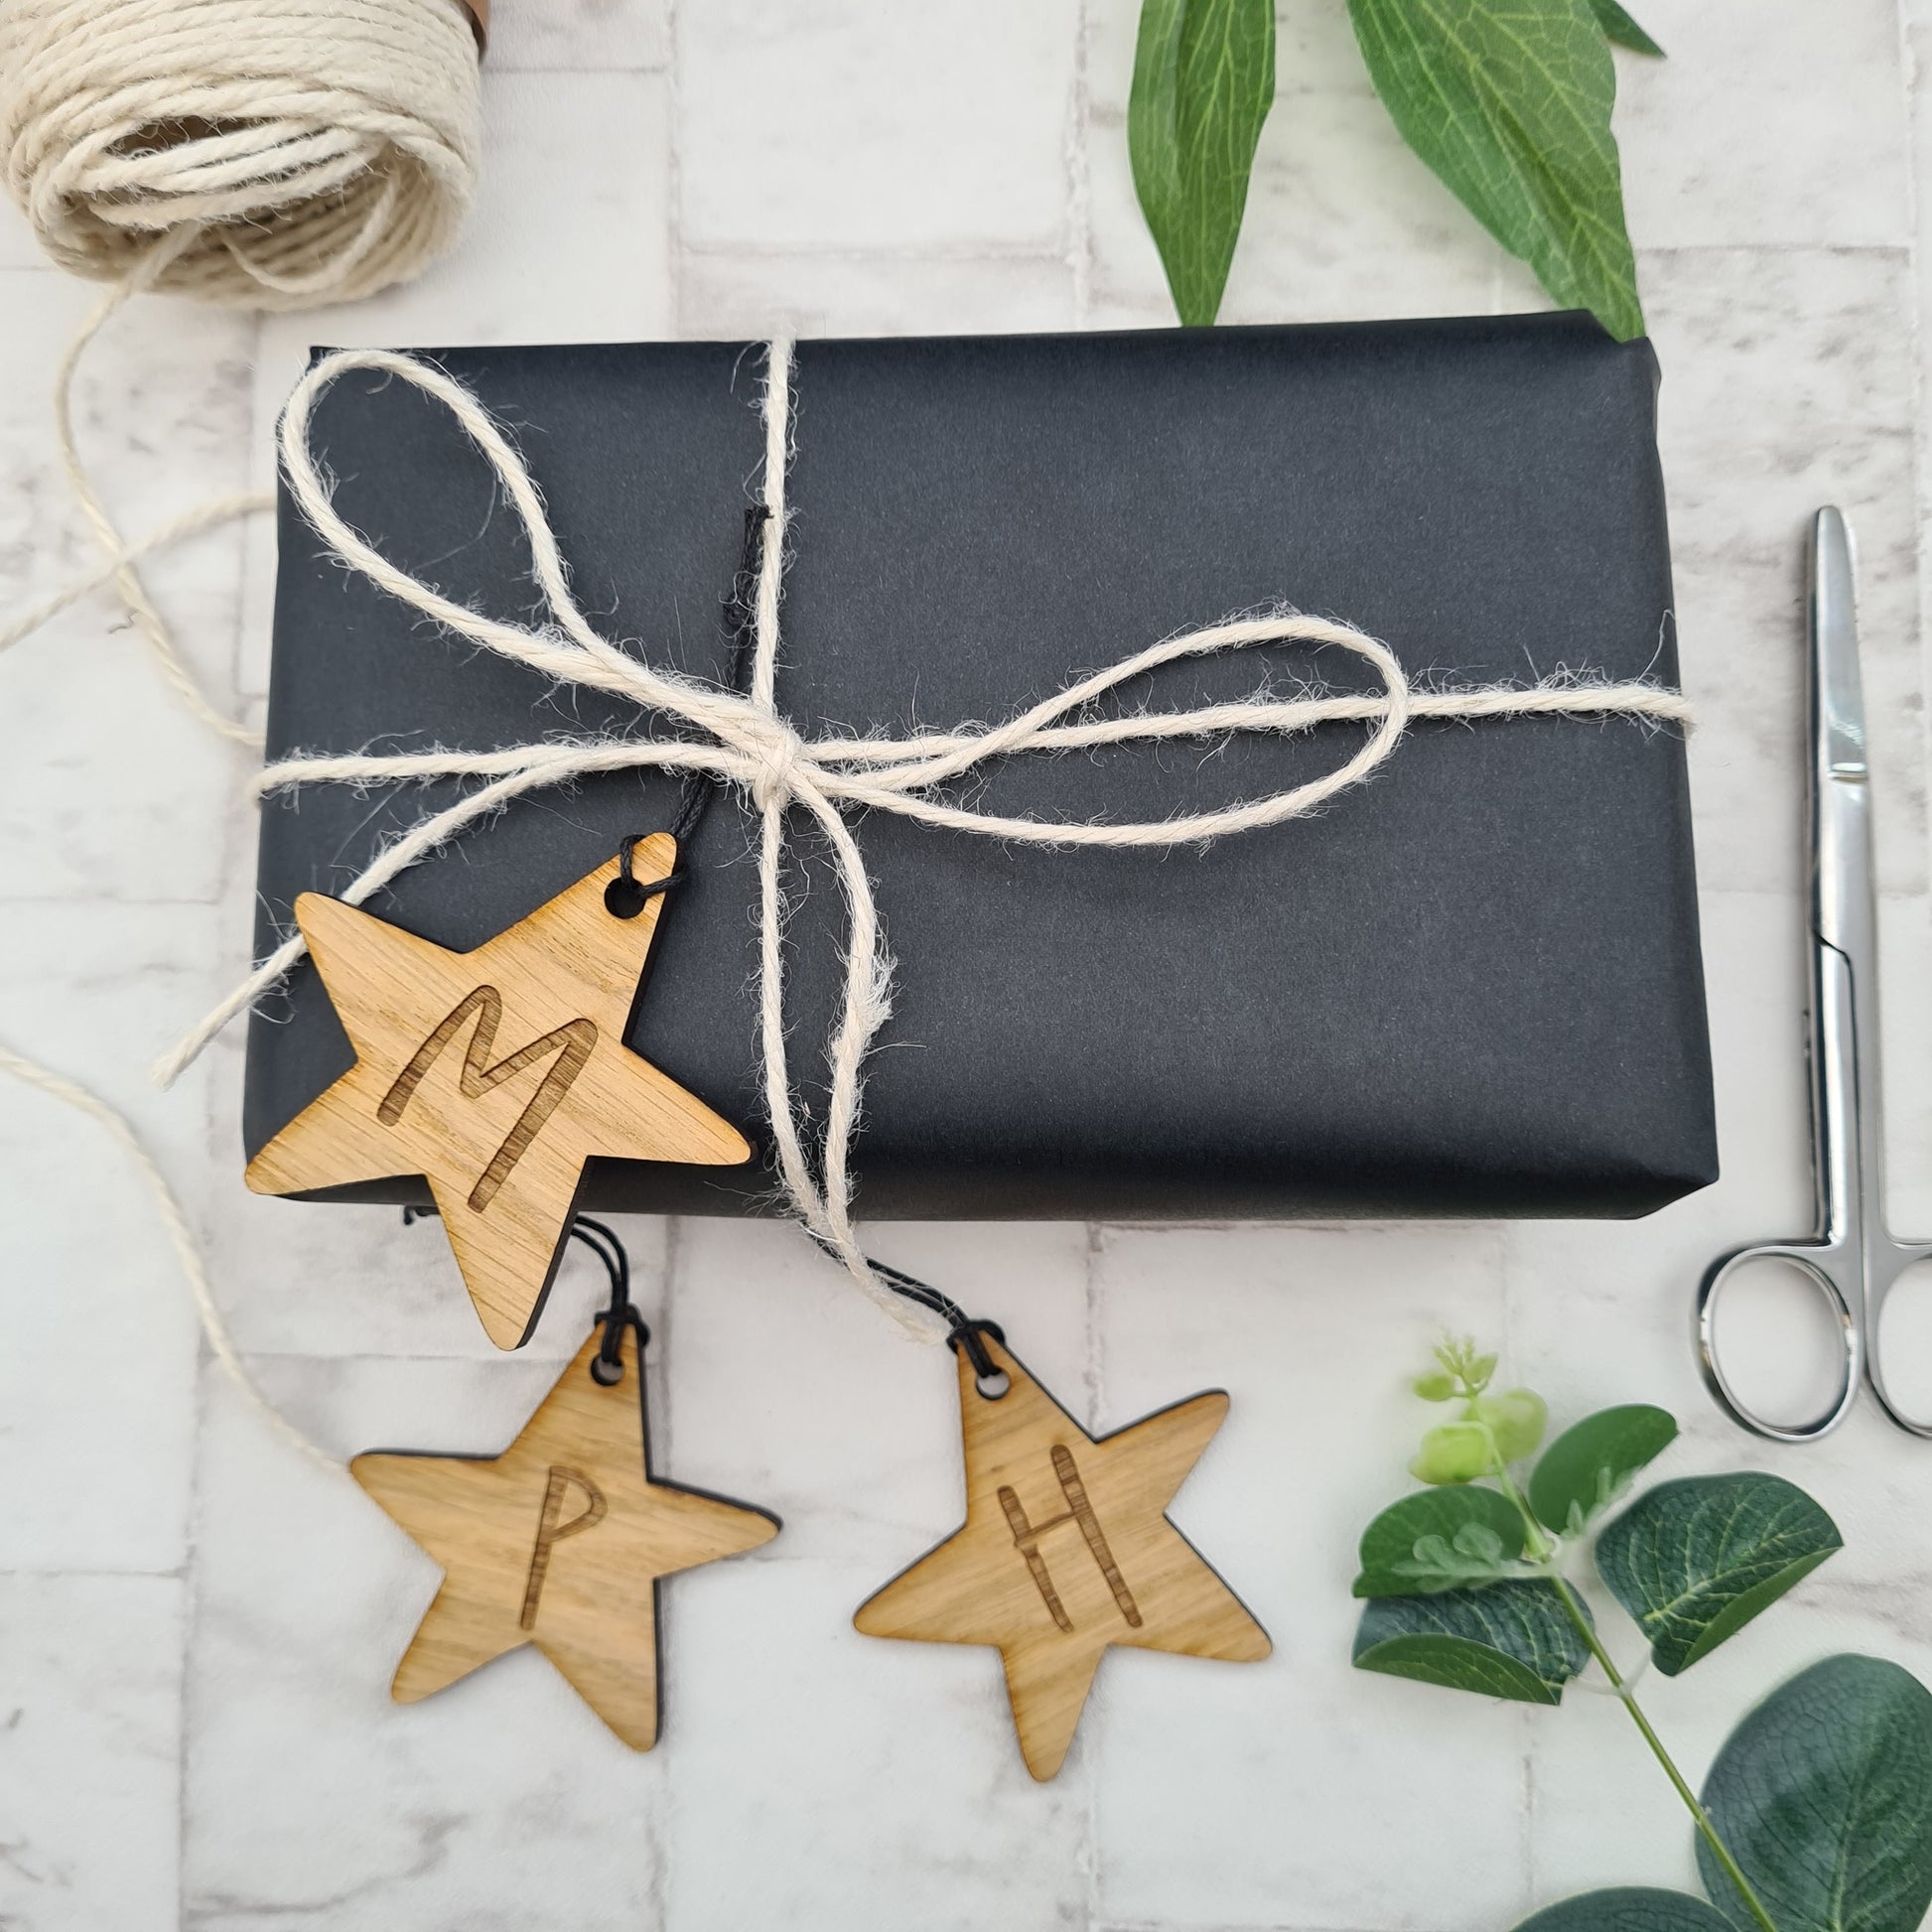 Personalised star shaped gift tag, made from wood and engraved with the initial of your choice